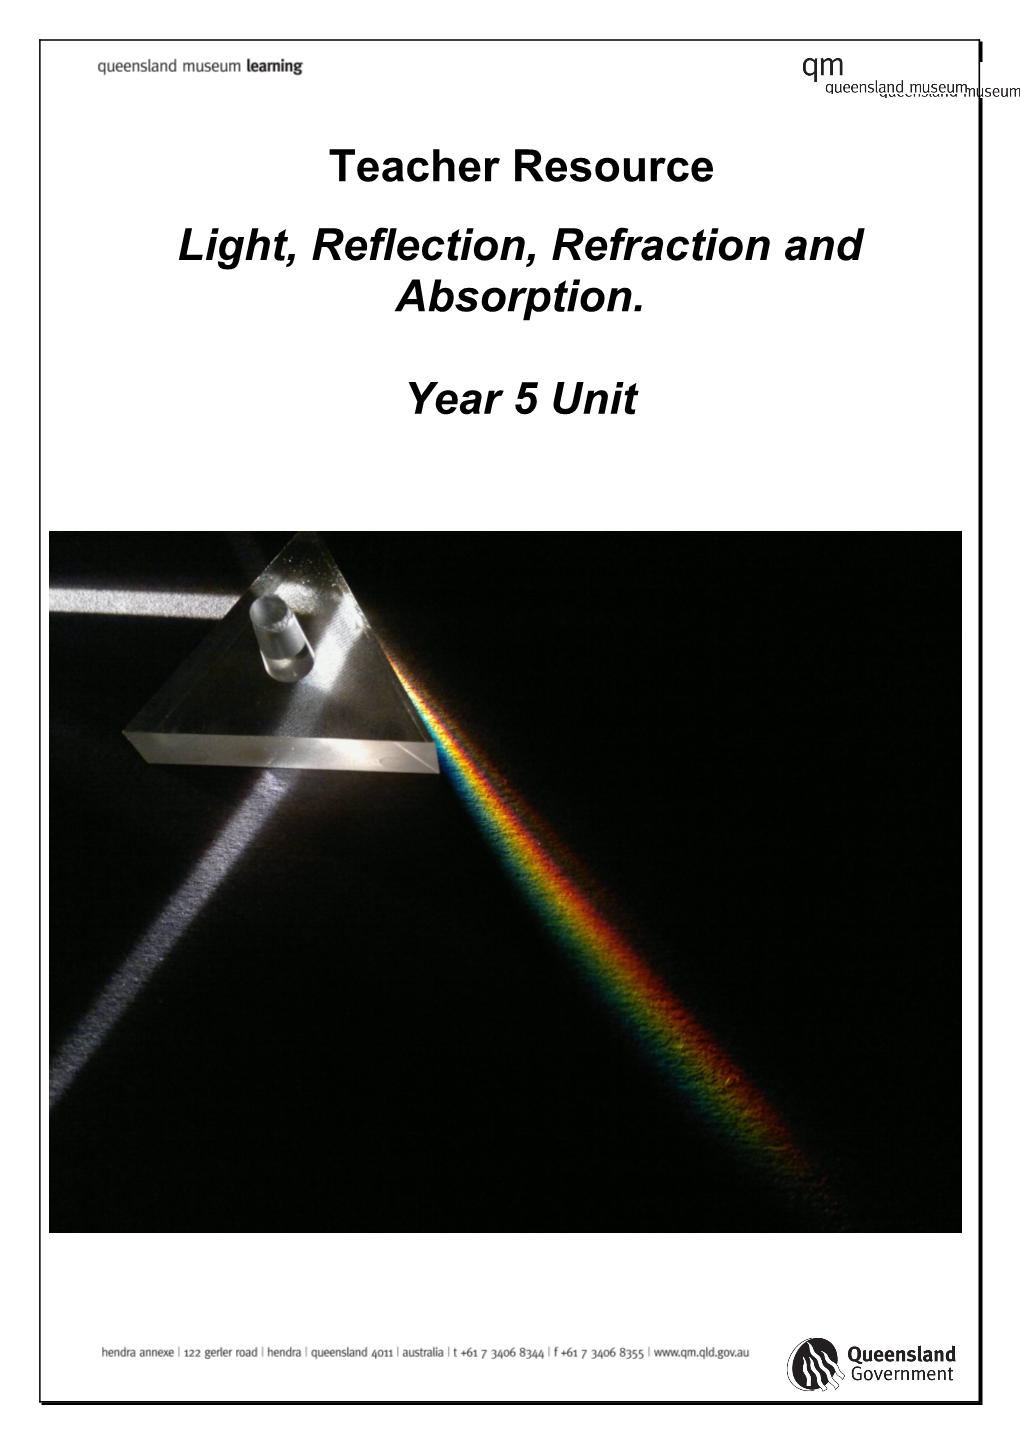 Light, Reflection, Refraction and Absorption s1